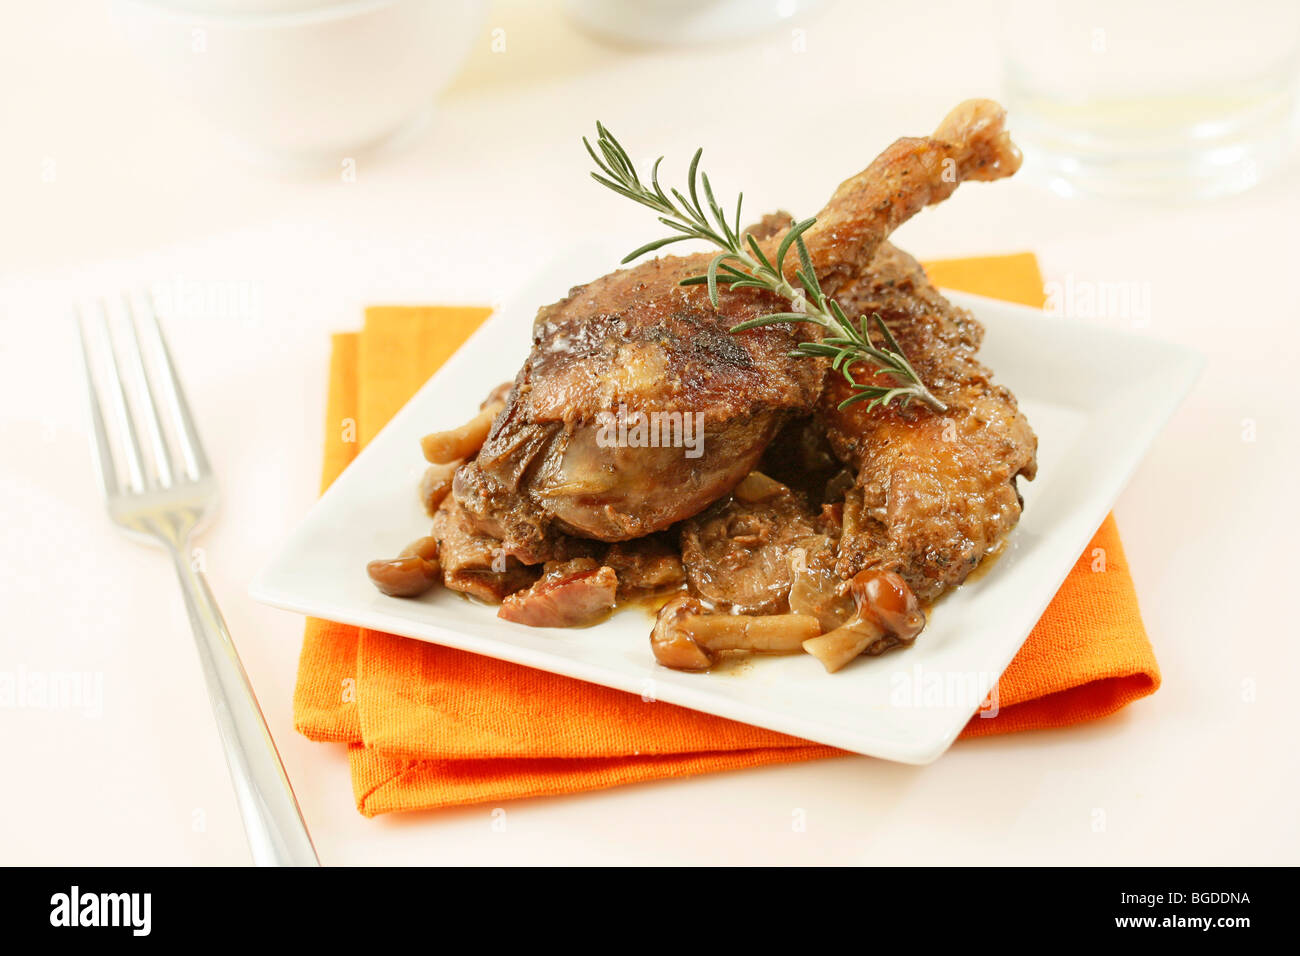 Roasted Confit du canard  with ham and mushrooms. Recipe available. Stock Photo